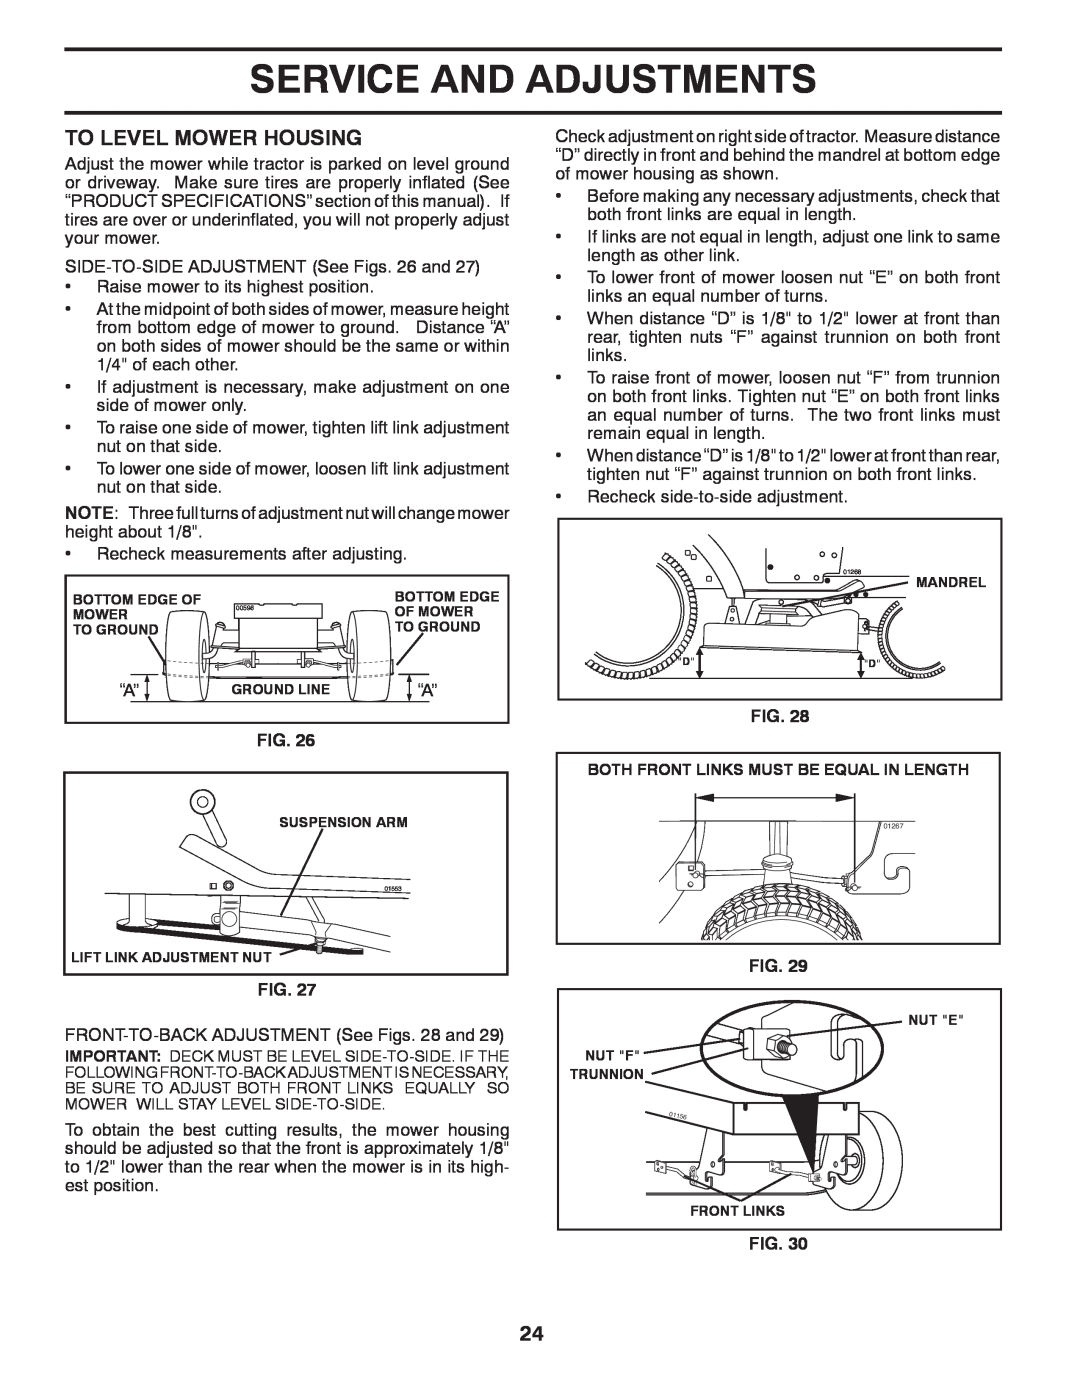 Husqvarna CTH2036 TWIN owner manual To Level Mower Housing, Service And Adjustments 